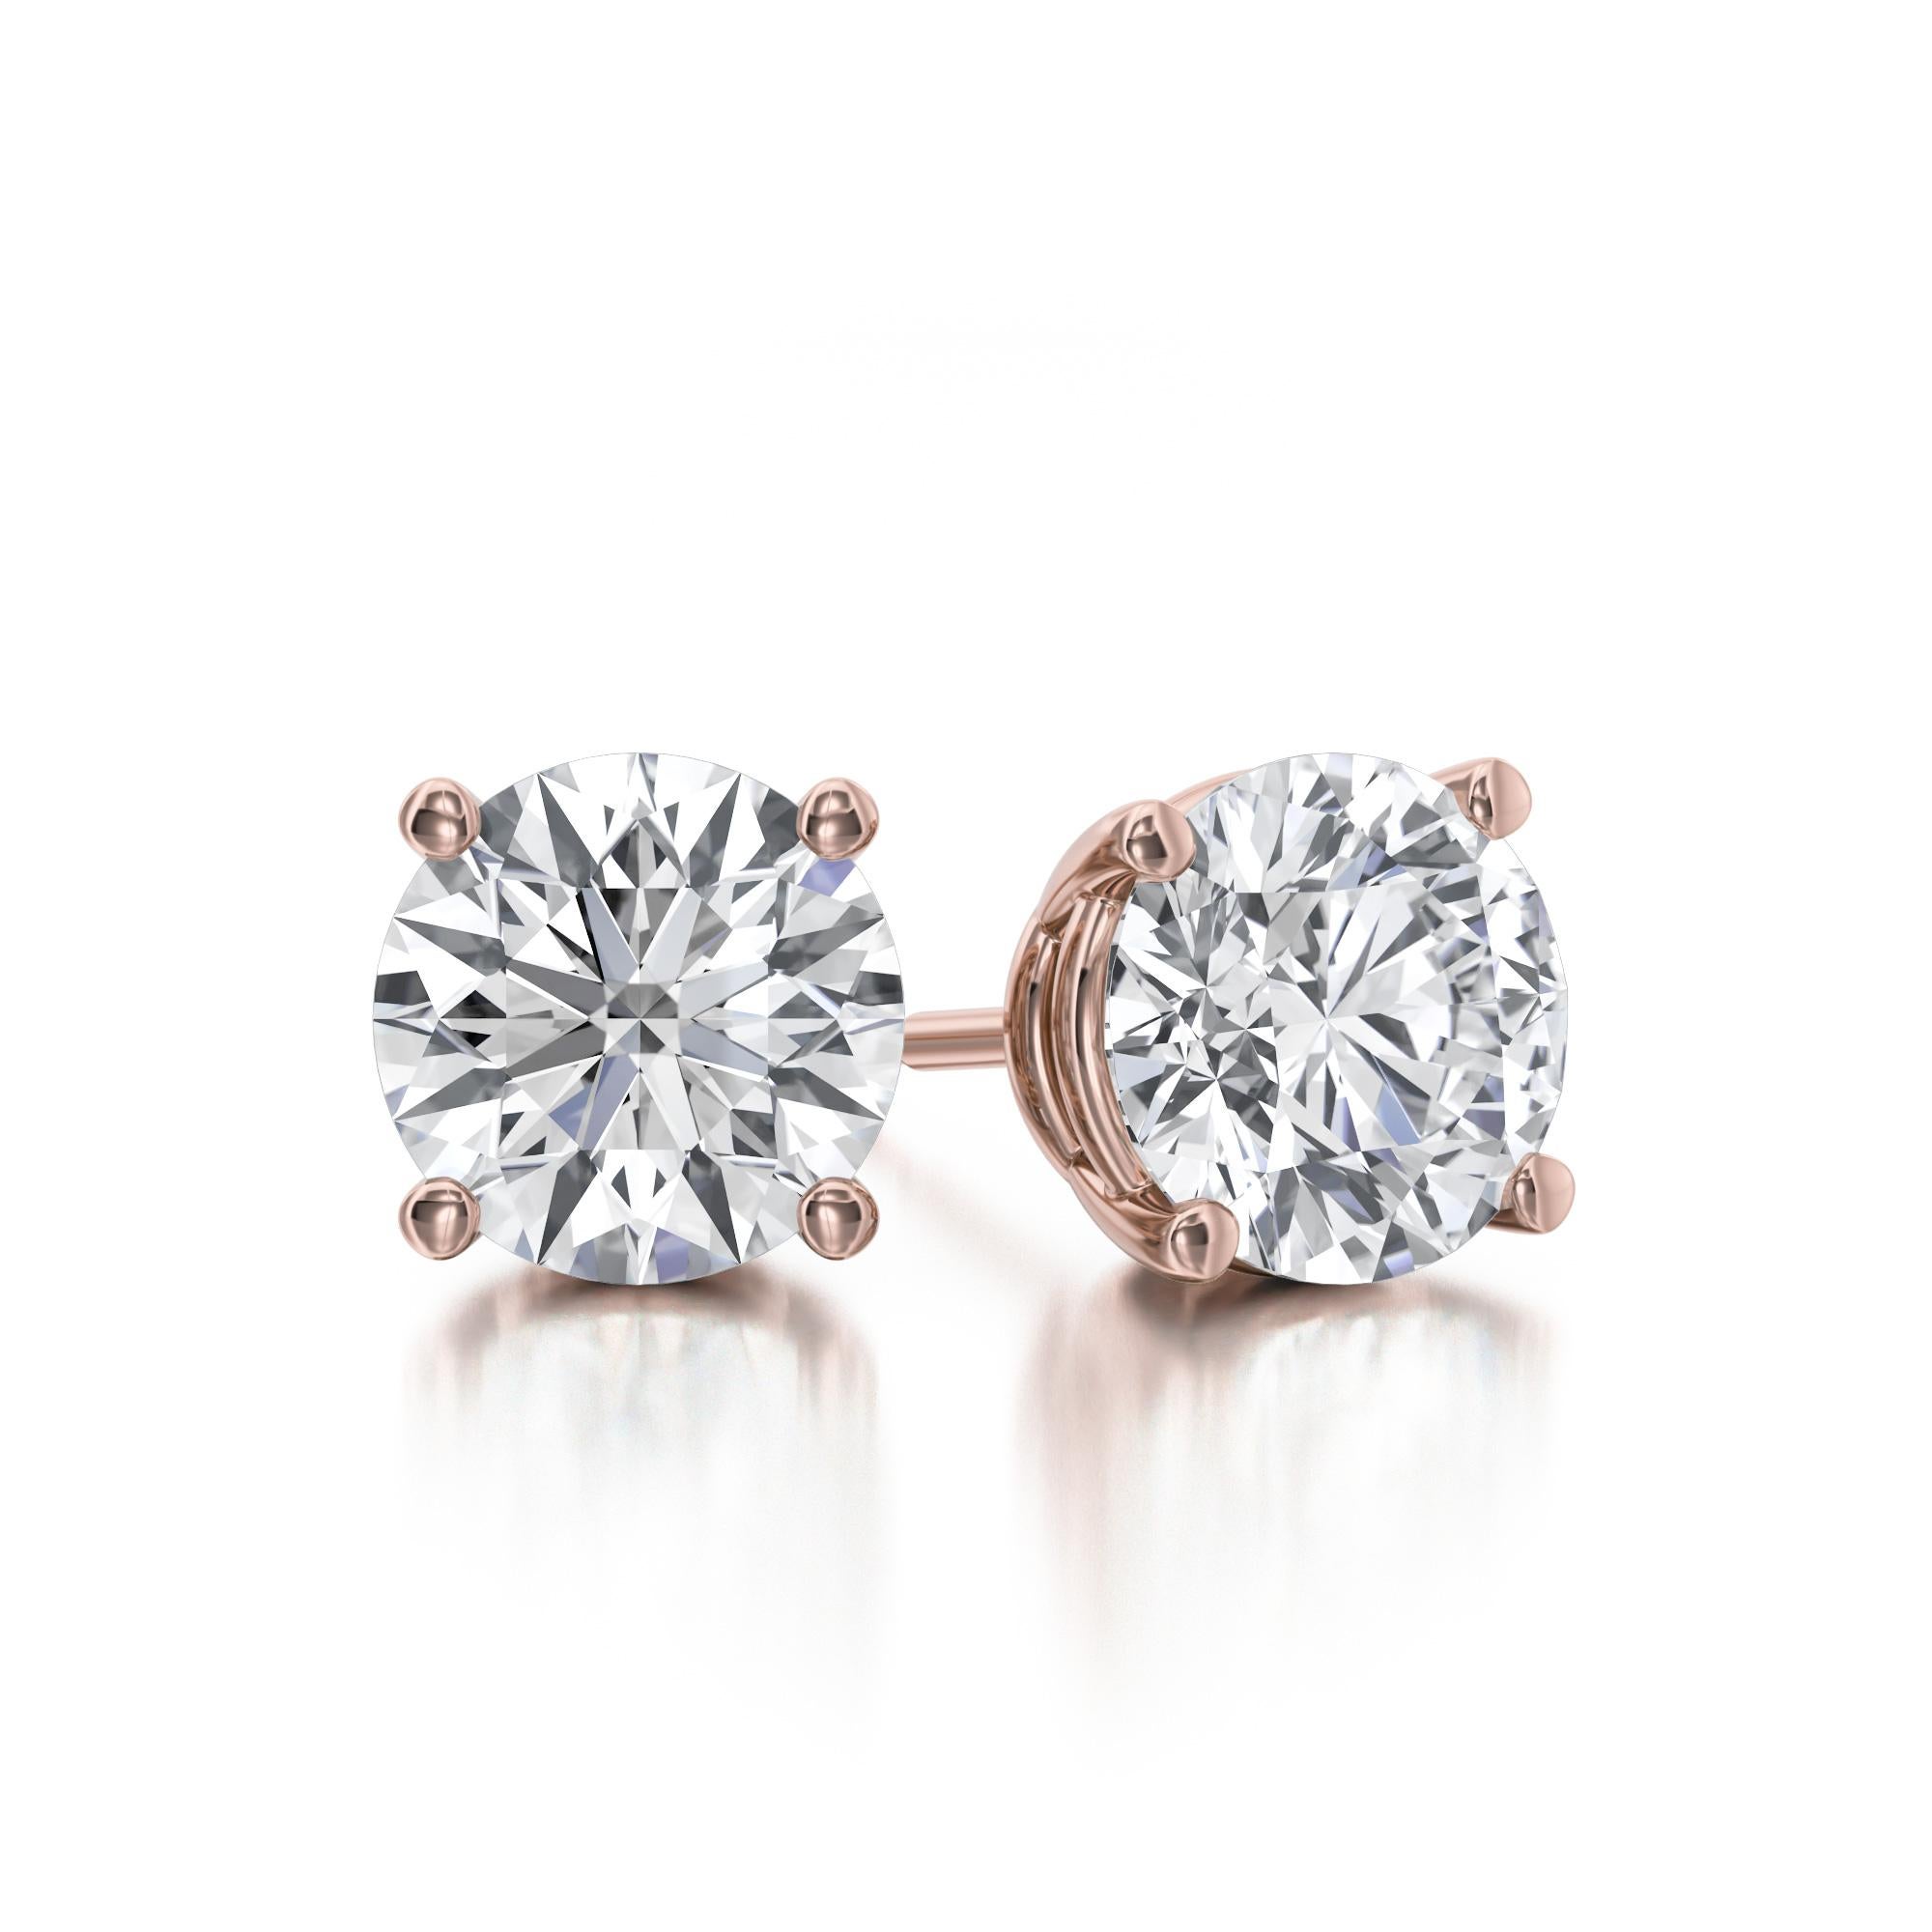 Classic Four Prong Diamond Stud Earrings, featuring:
✧ 2 natural diamonds G-H color SI weighing 1.00 carats 
✧ Measurements: 5.00mm*5.00mm
✧ Available in 14K Rose Gold
✧ Push back friction closure
✧ Free appraisal included with your purchase
✧ Comes